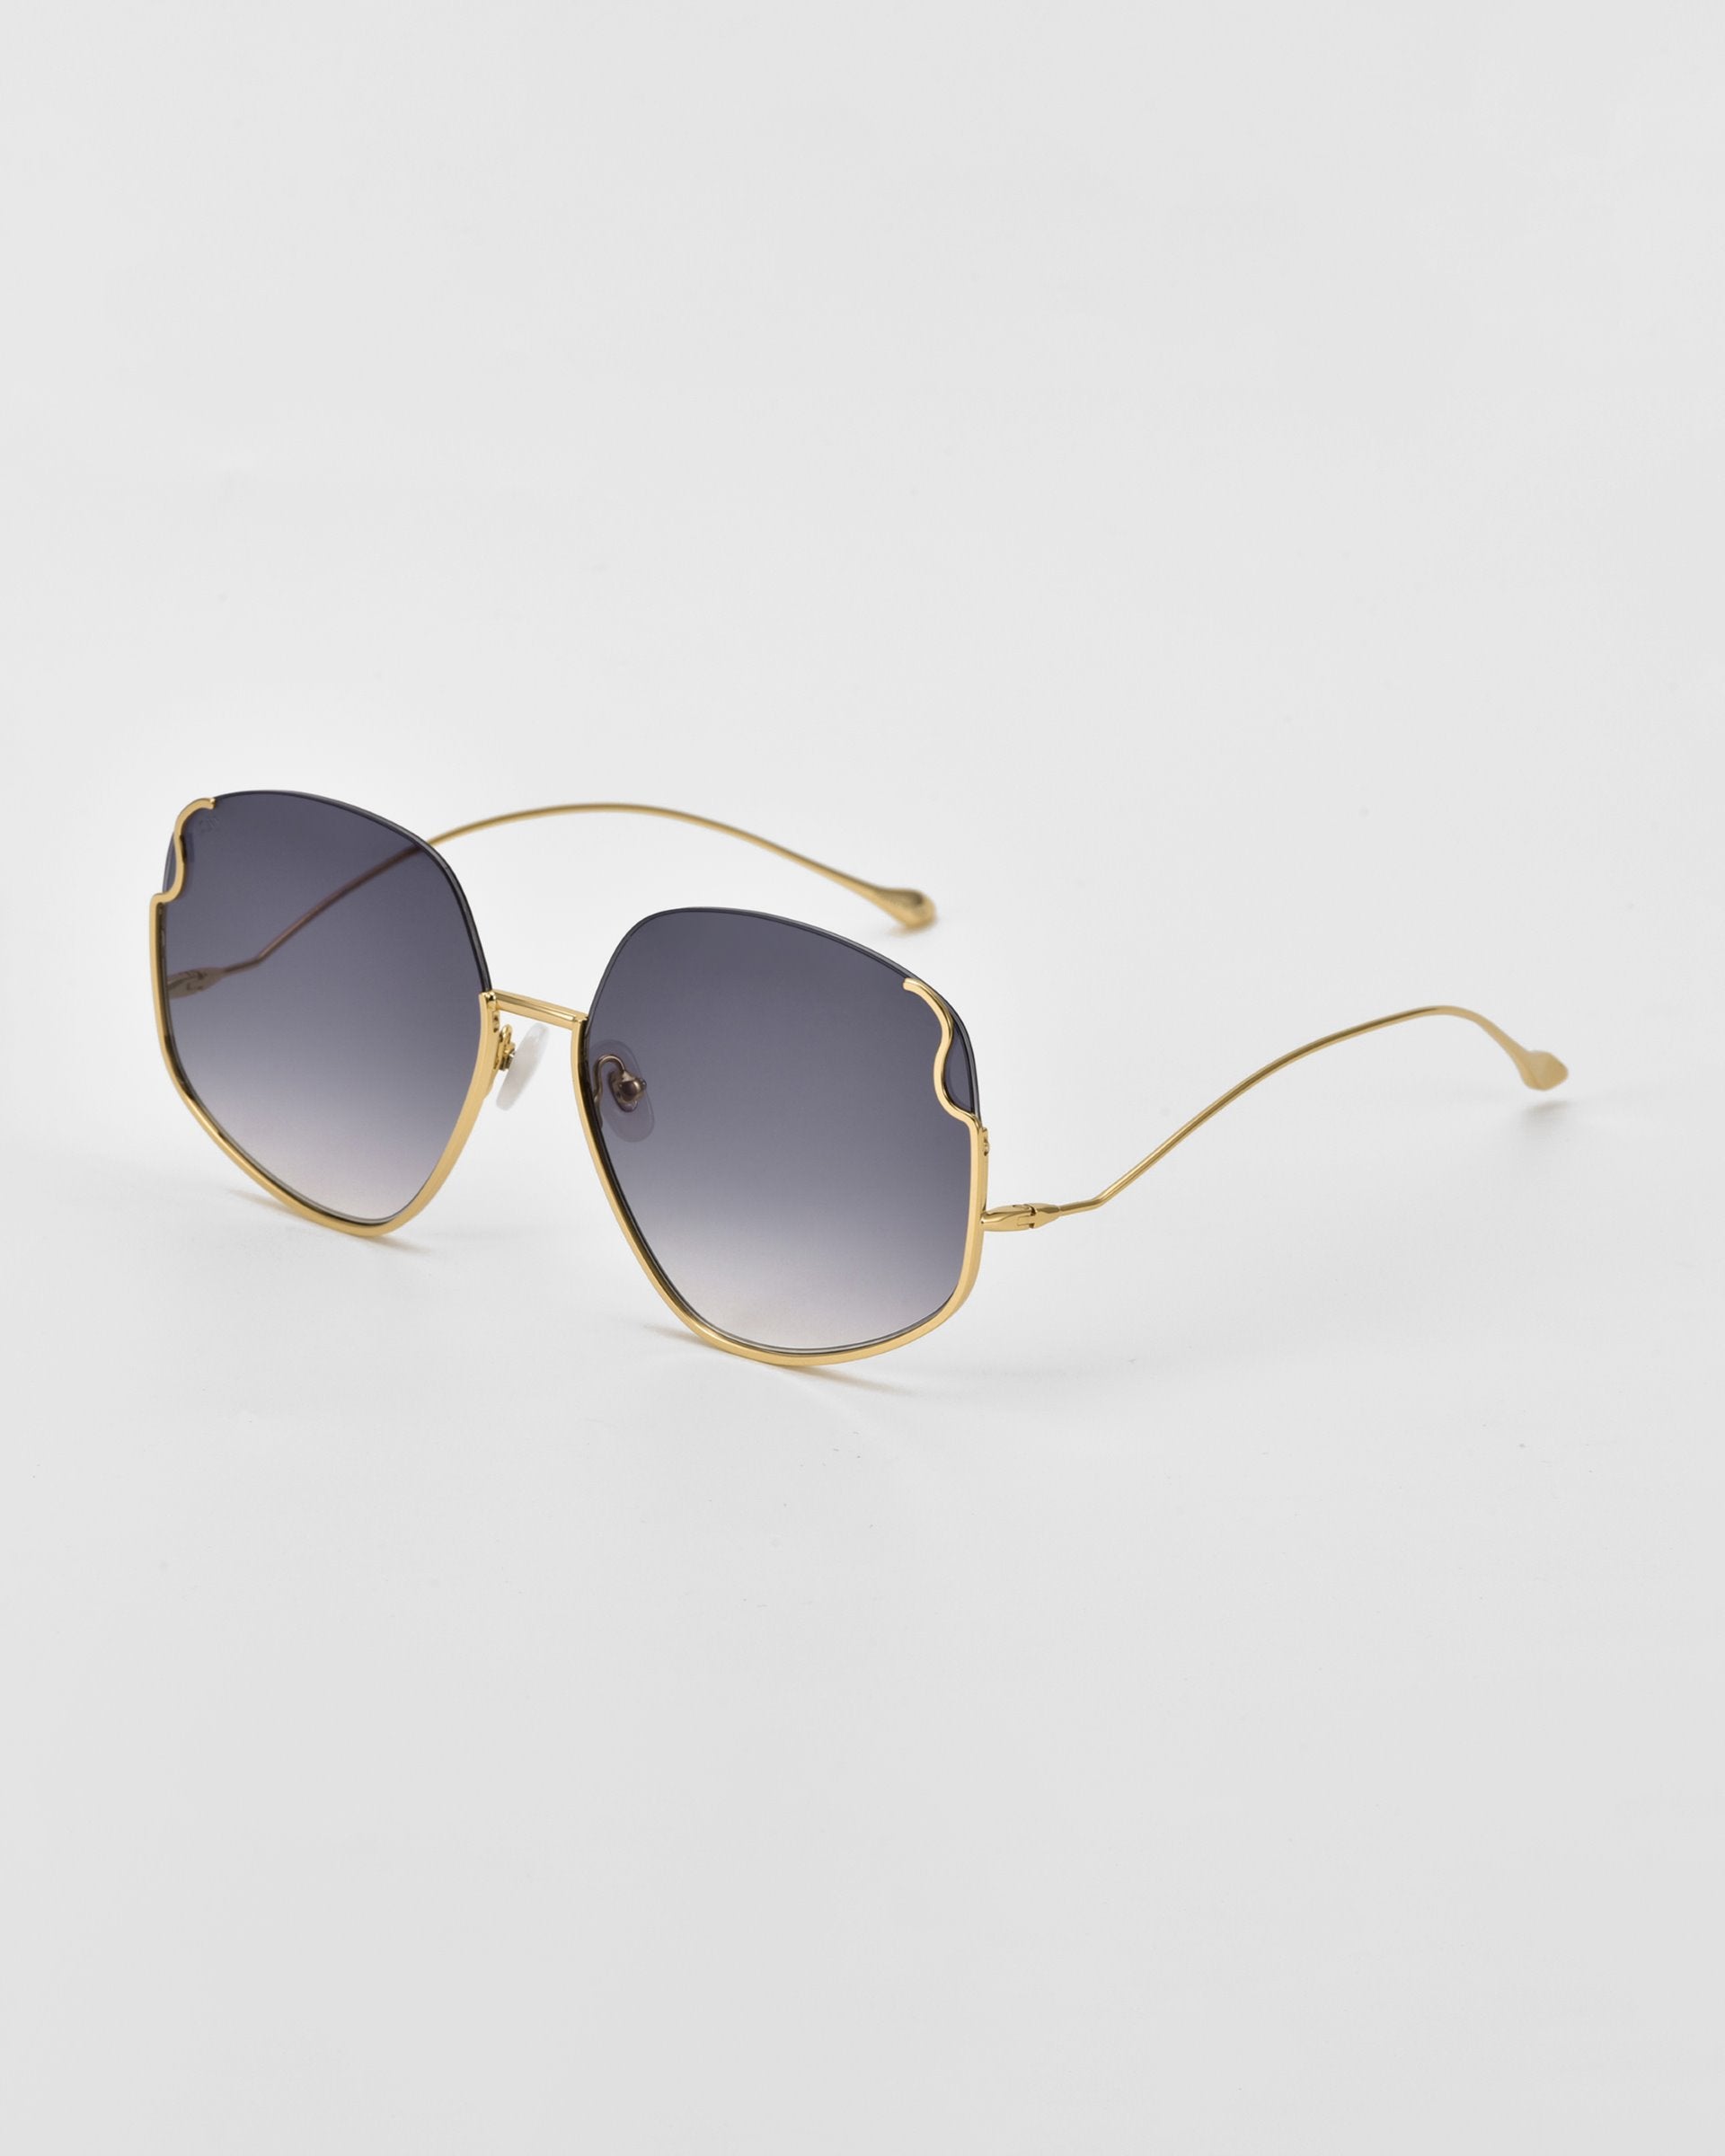 A pair of Drape sunglasses by For Art&#39;s Sake® with gold frames and dark, gradient lenses. The design features a unique, slightly wavy cut on the top edges of the oversized squared frame. Intricate metal detailing adds to their charm as they rest on a white surface, viewed at an angle.